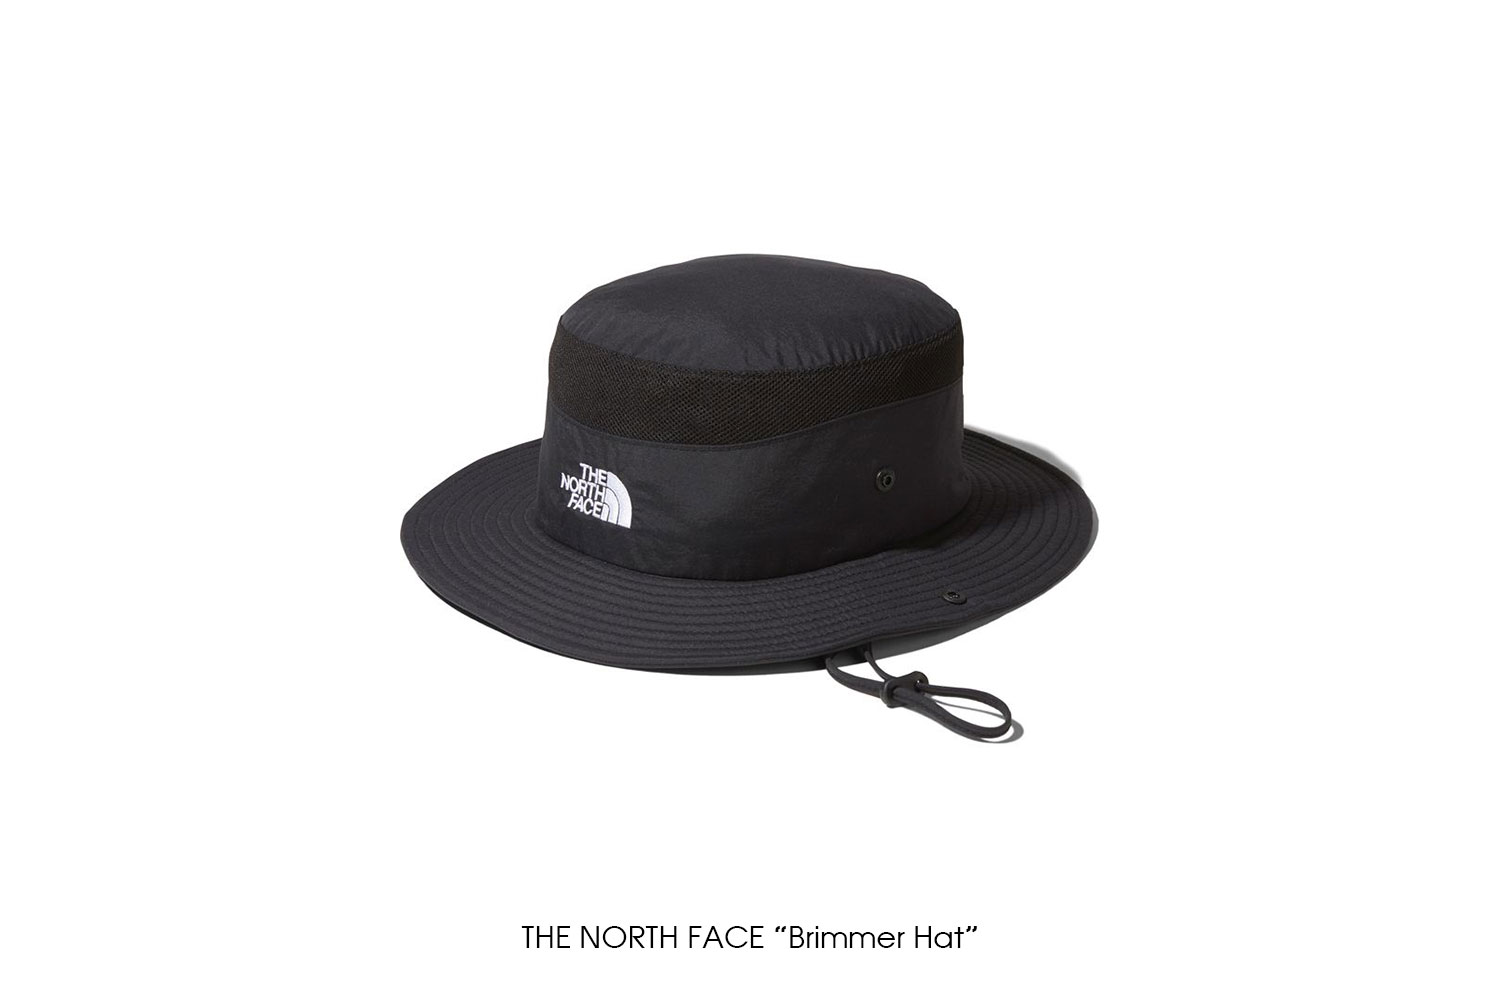 THE NORTH FACE "Brimmer Hat"